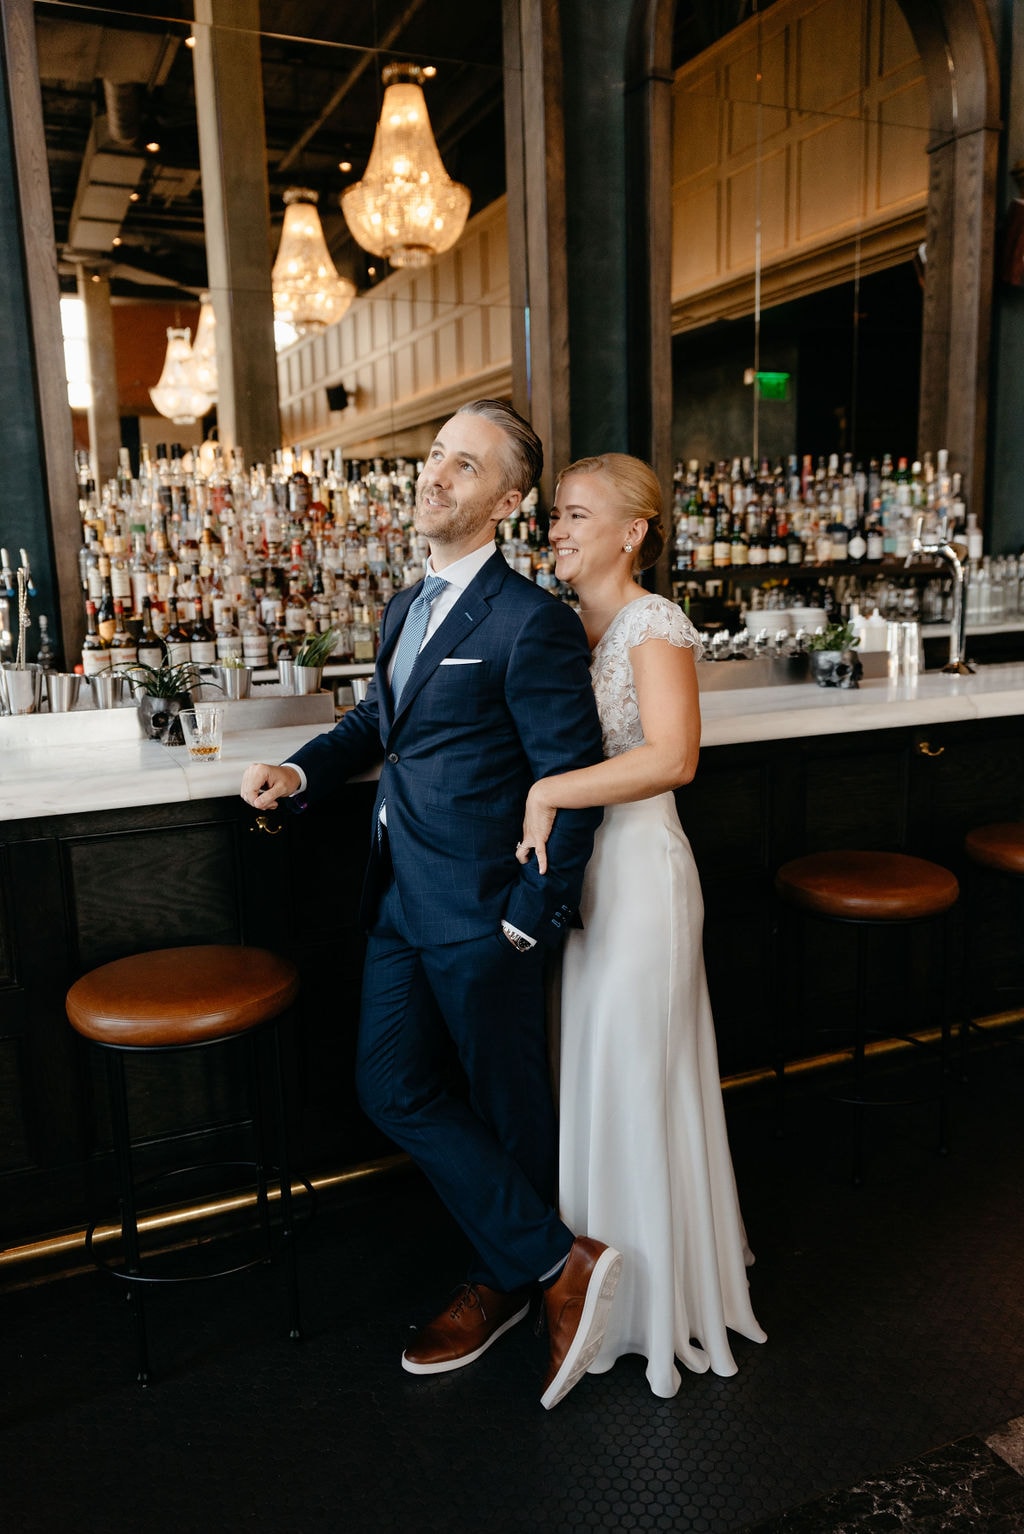 Wedding First look at The Ramble Hotel Death And Co Bar in Downtown Denver